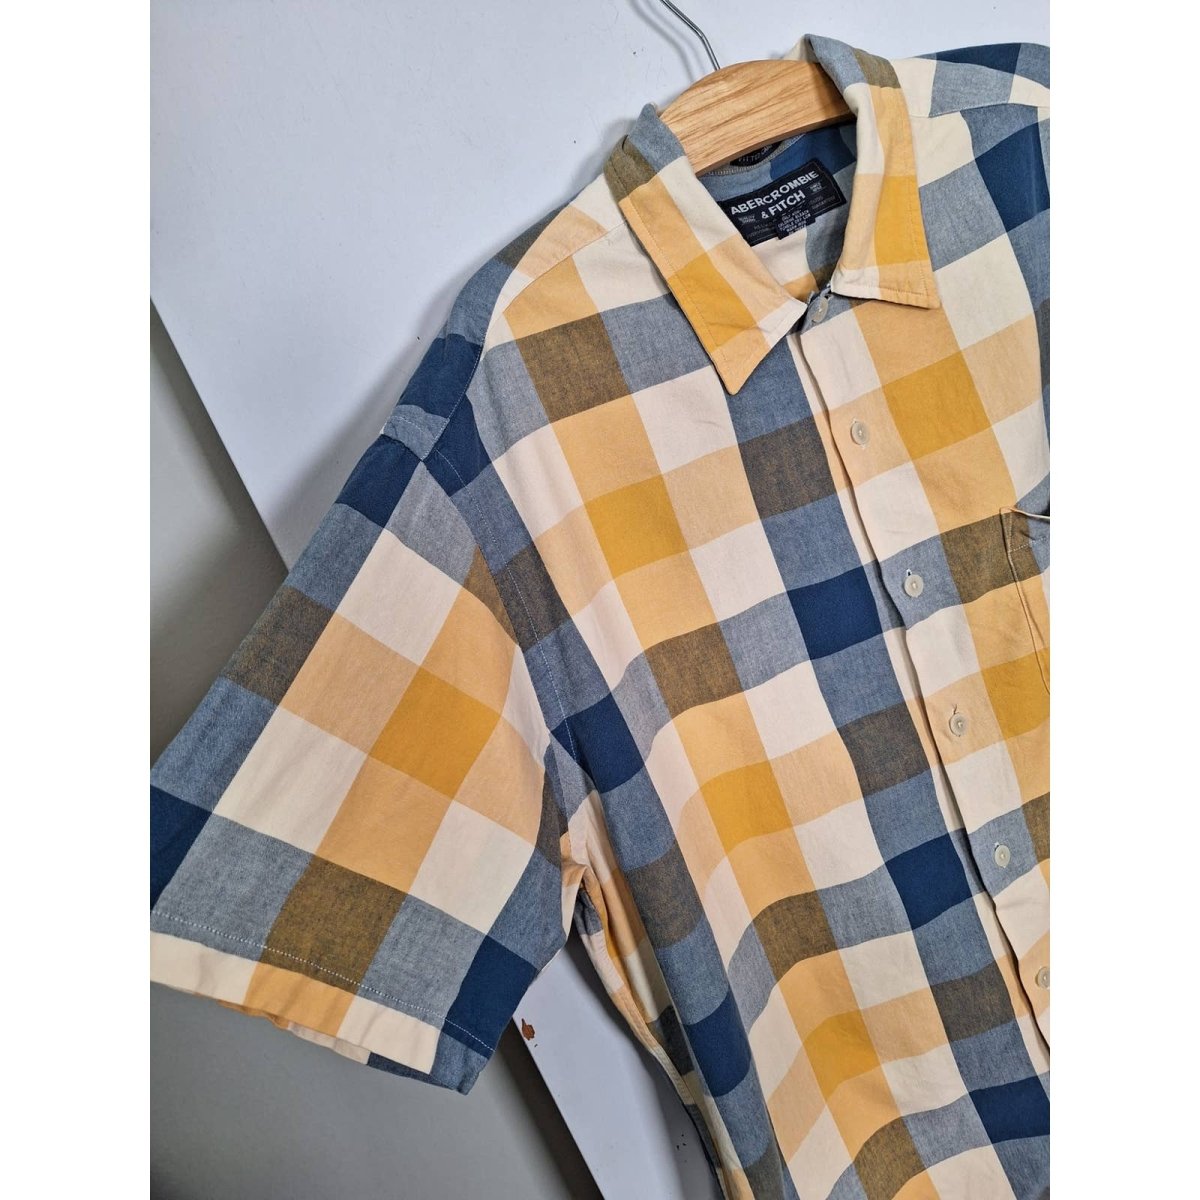 90s/Y2K Abercrombie Check Camp Shirt Men XL - themallvintage The Mall Vintage